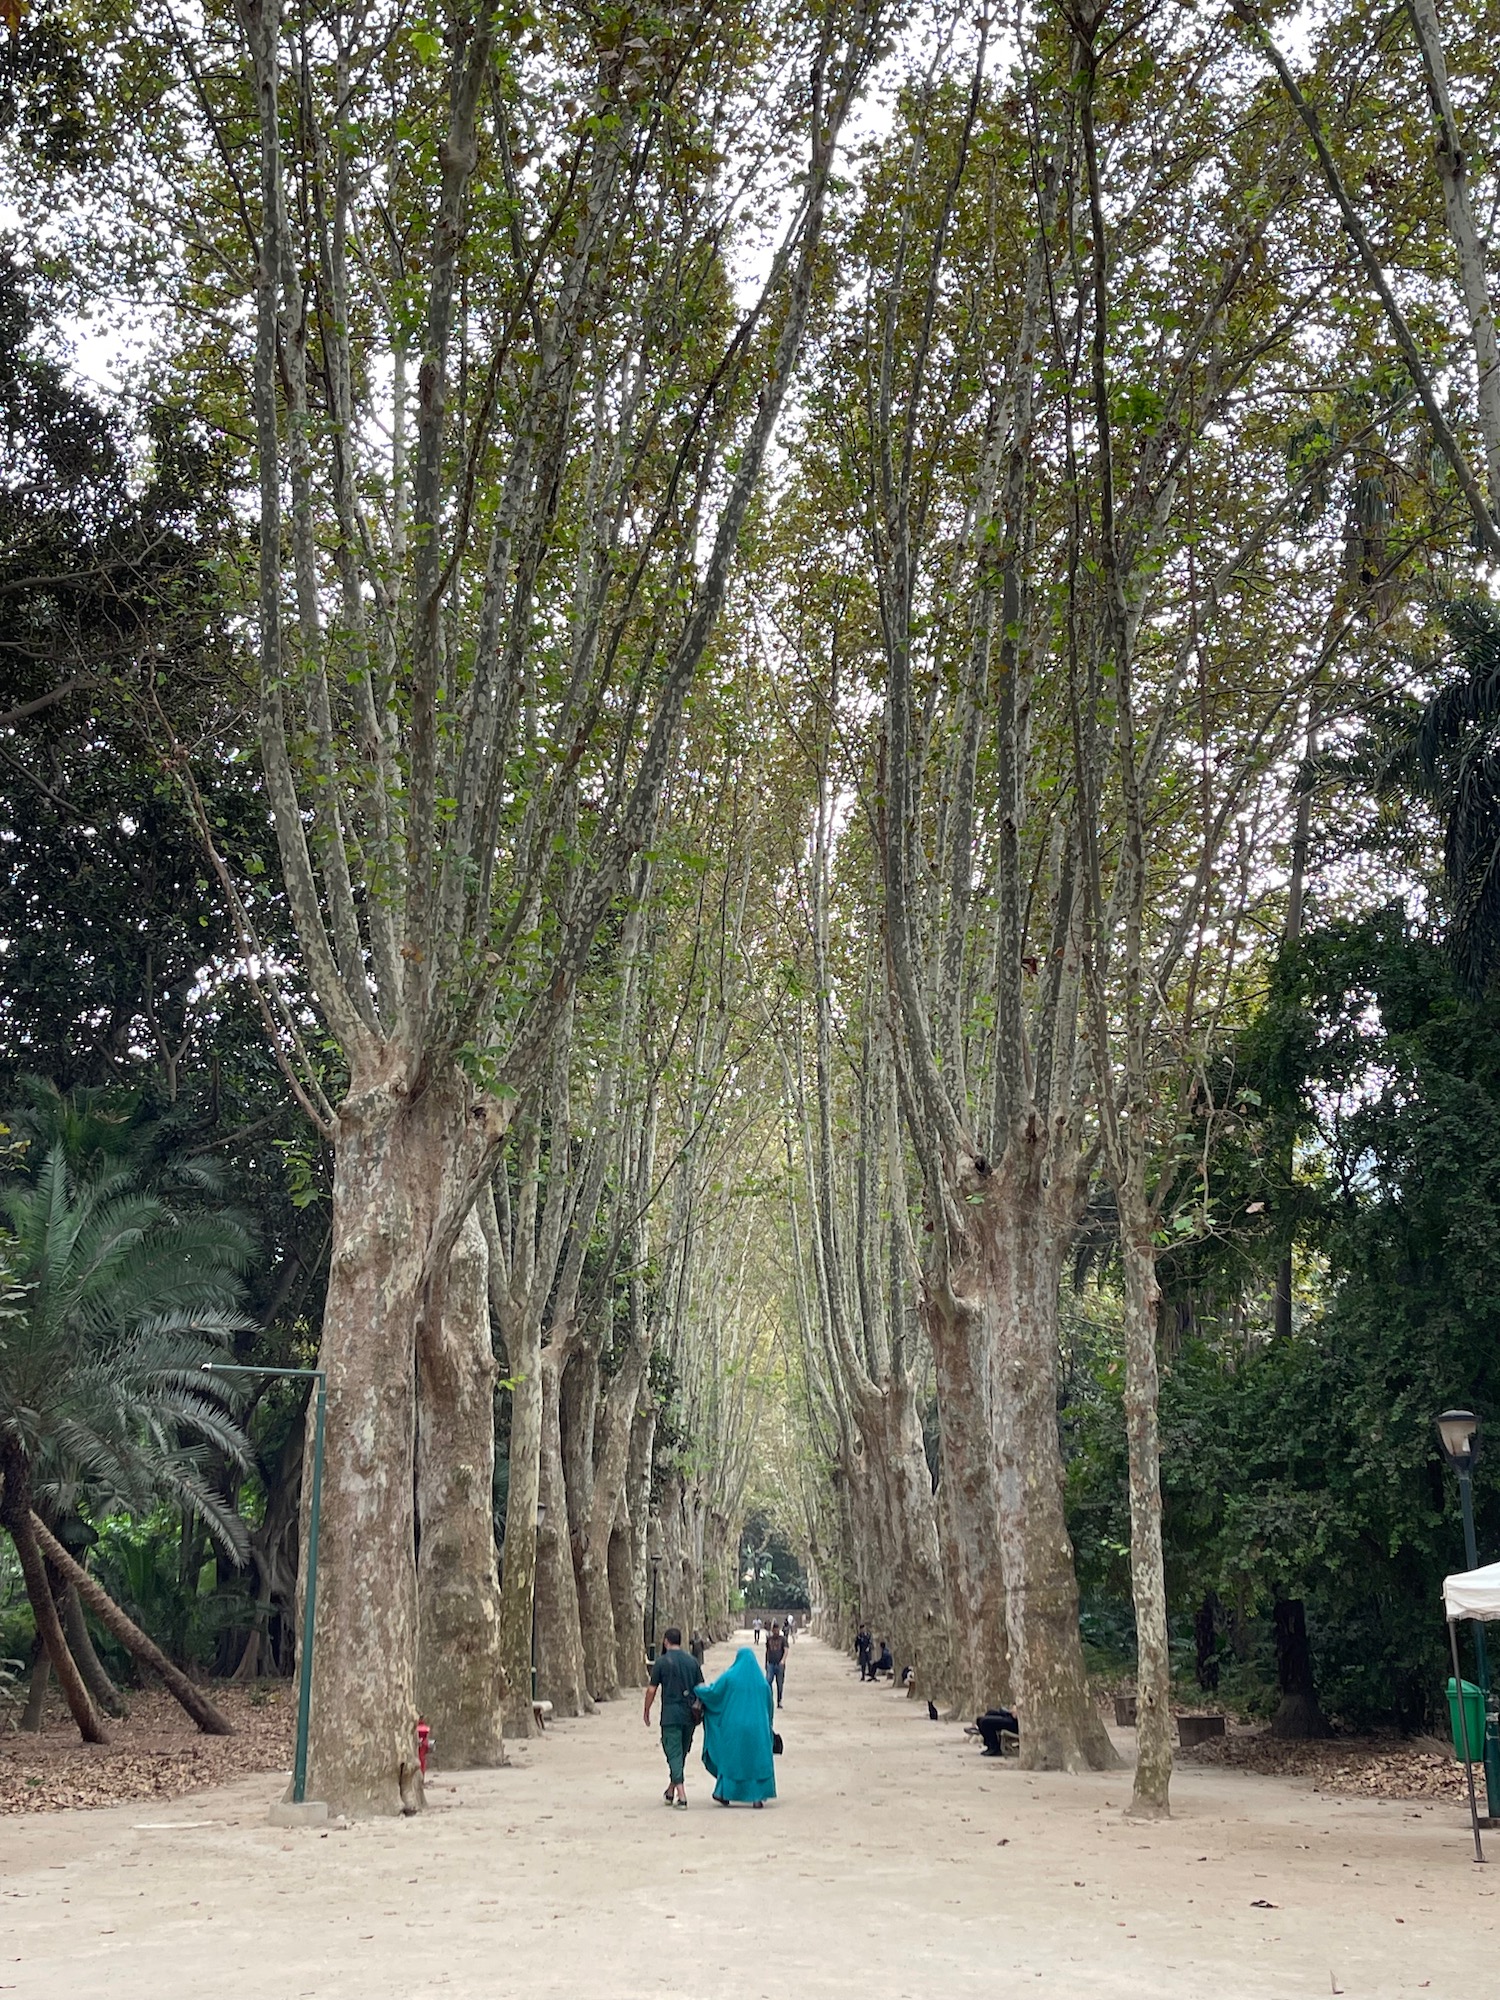 a group of people walking on a path with trees